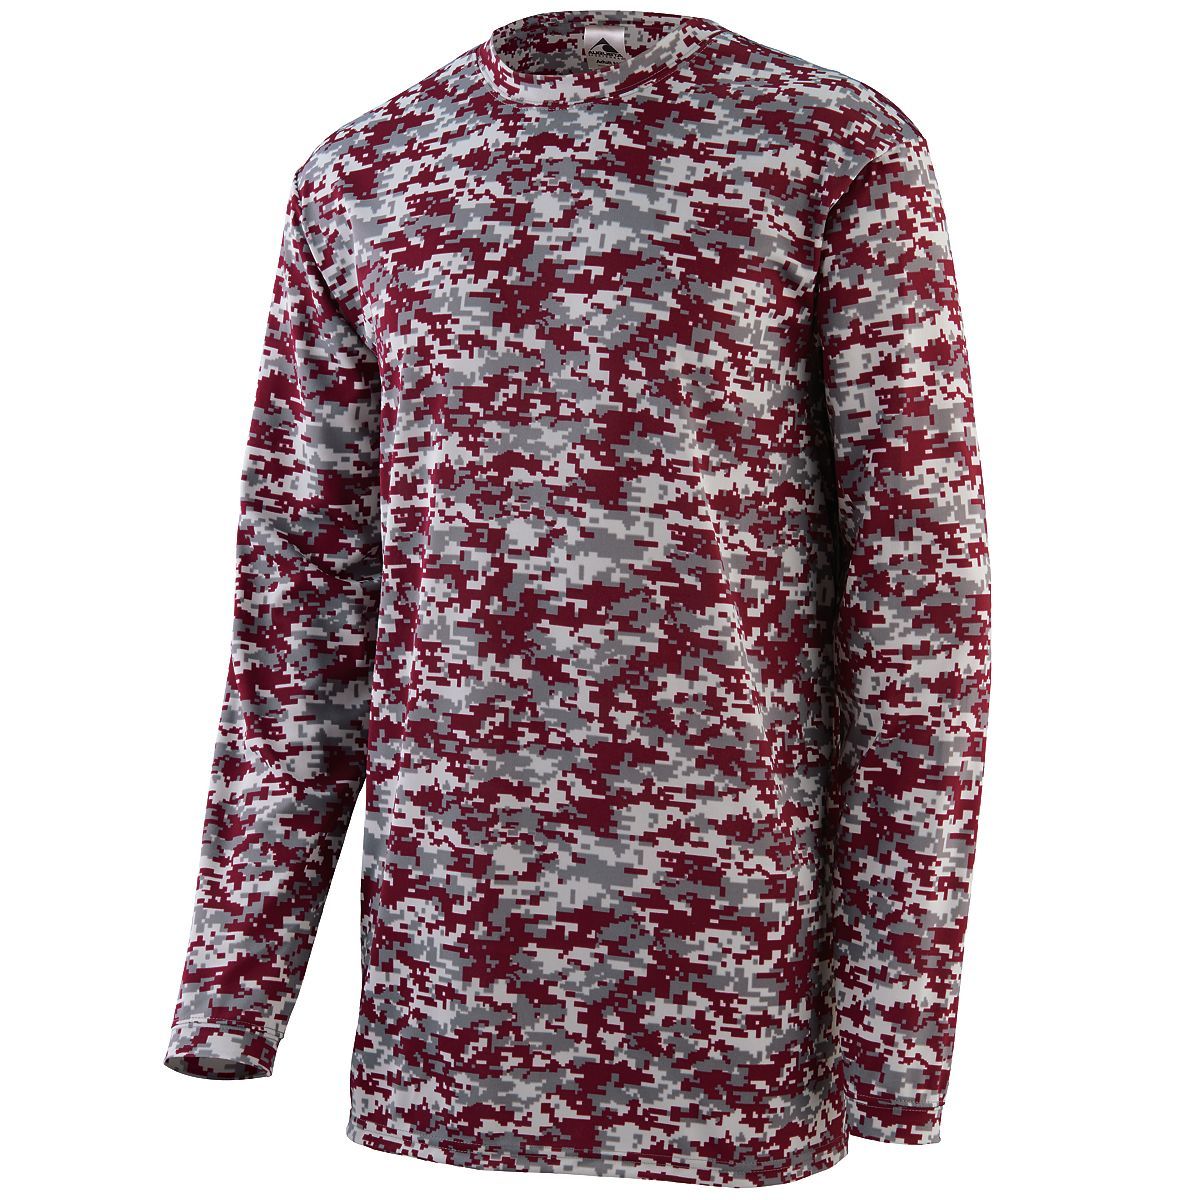 Augusta Sportswear Digi Camo Wicking Long Sleeve T-Shirt in Maroon Digi  -Part of the Adult, Adult-Tee-Shirt, T-Shirts, Augusta-Products, Shirts product lines at KanaleyCreations.com